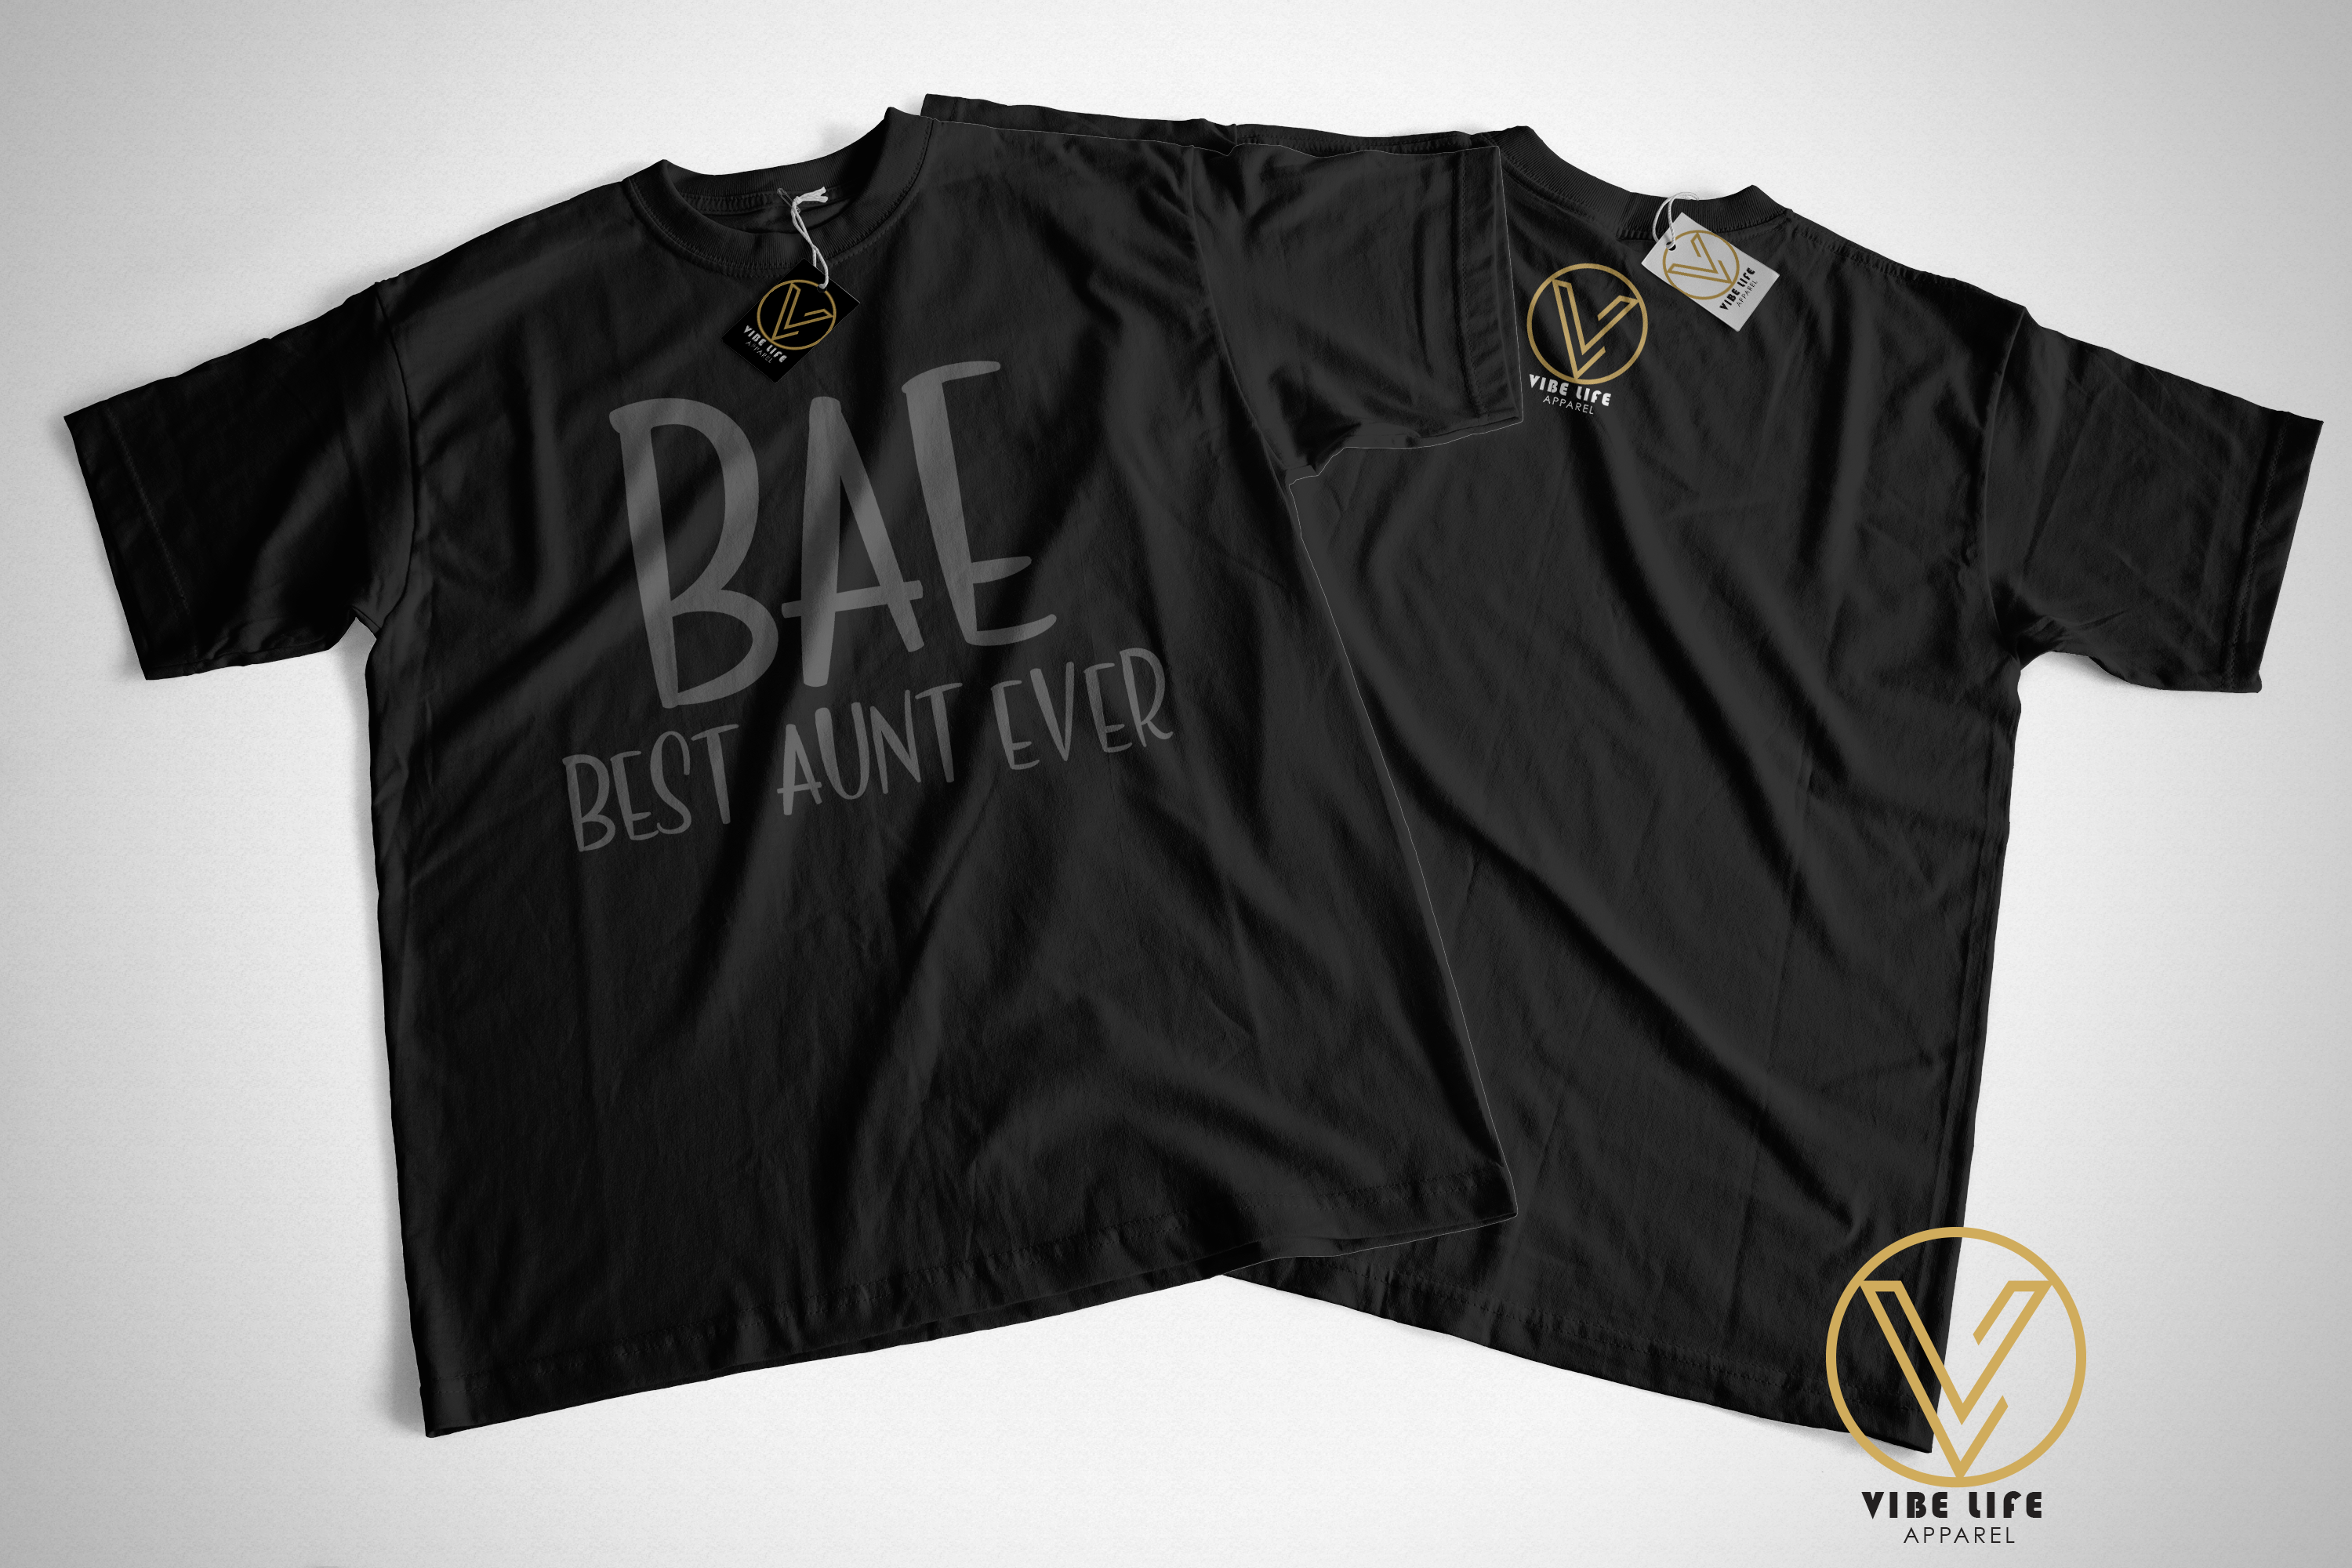 B.A.E. - Best Auntie Ever - Unisex Softstyle Crewneck Tee